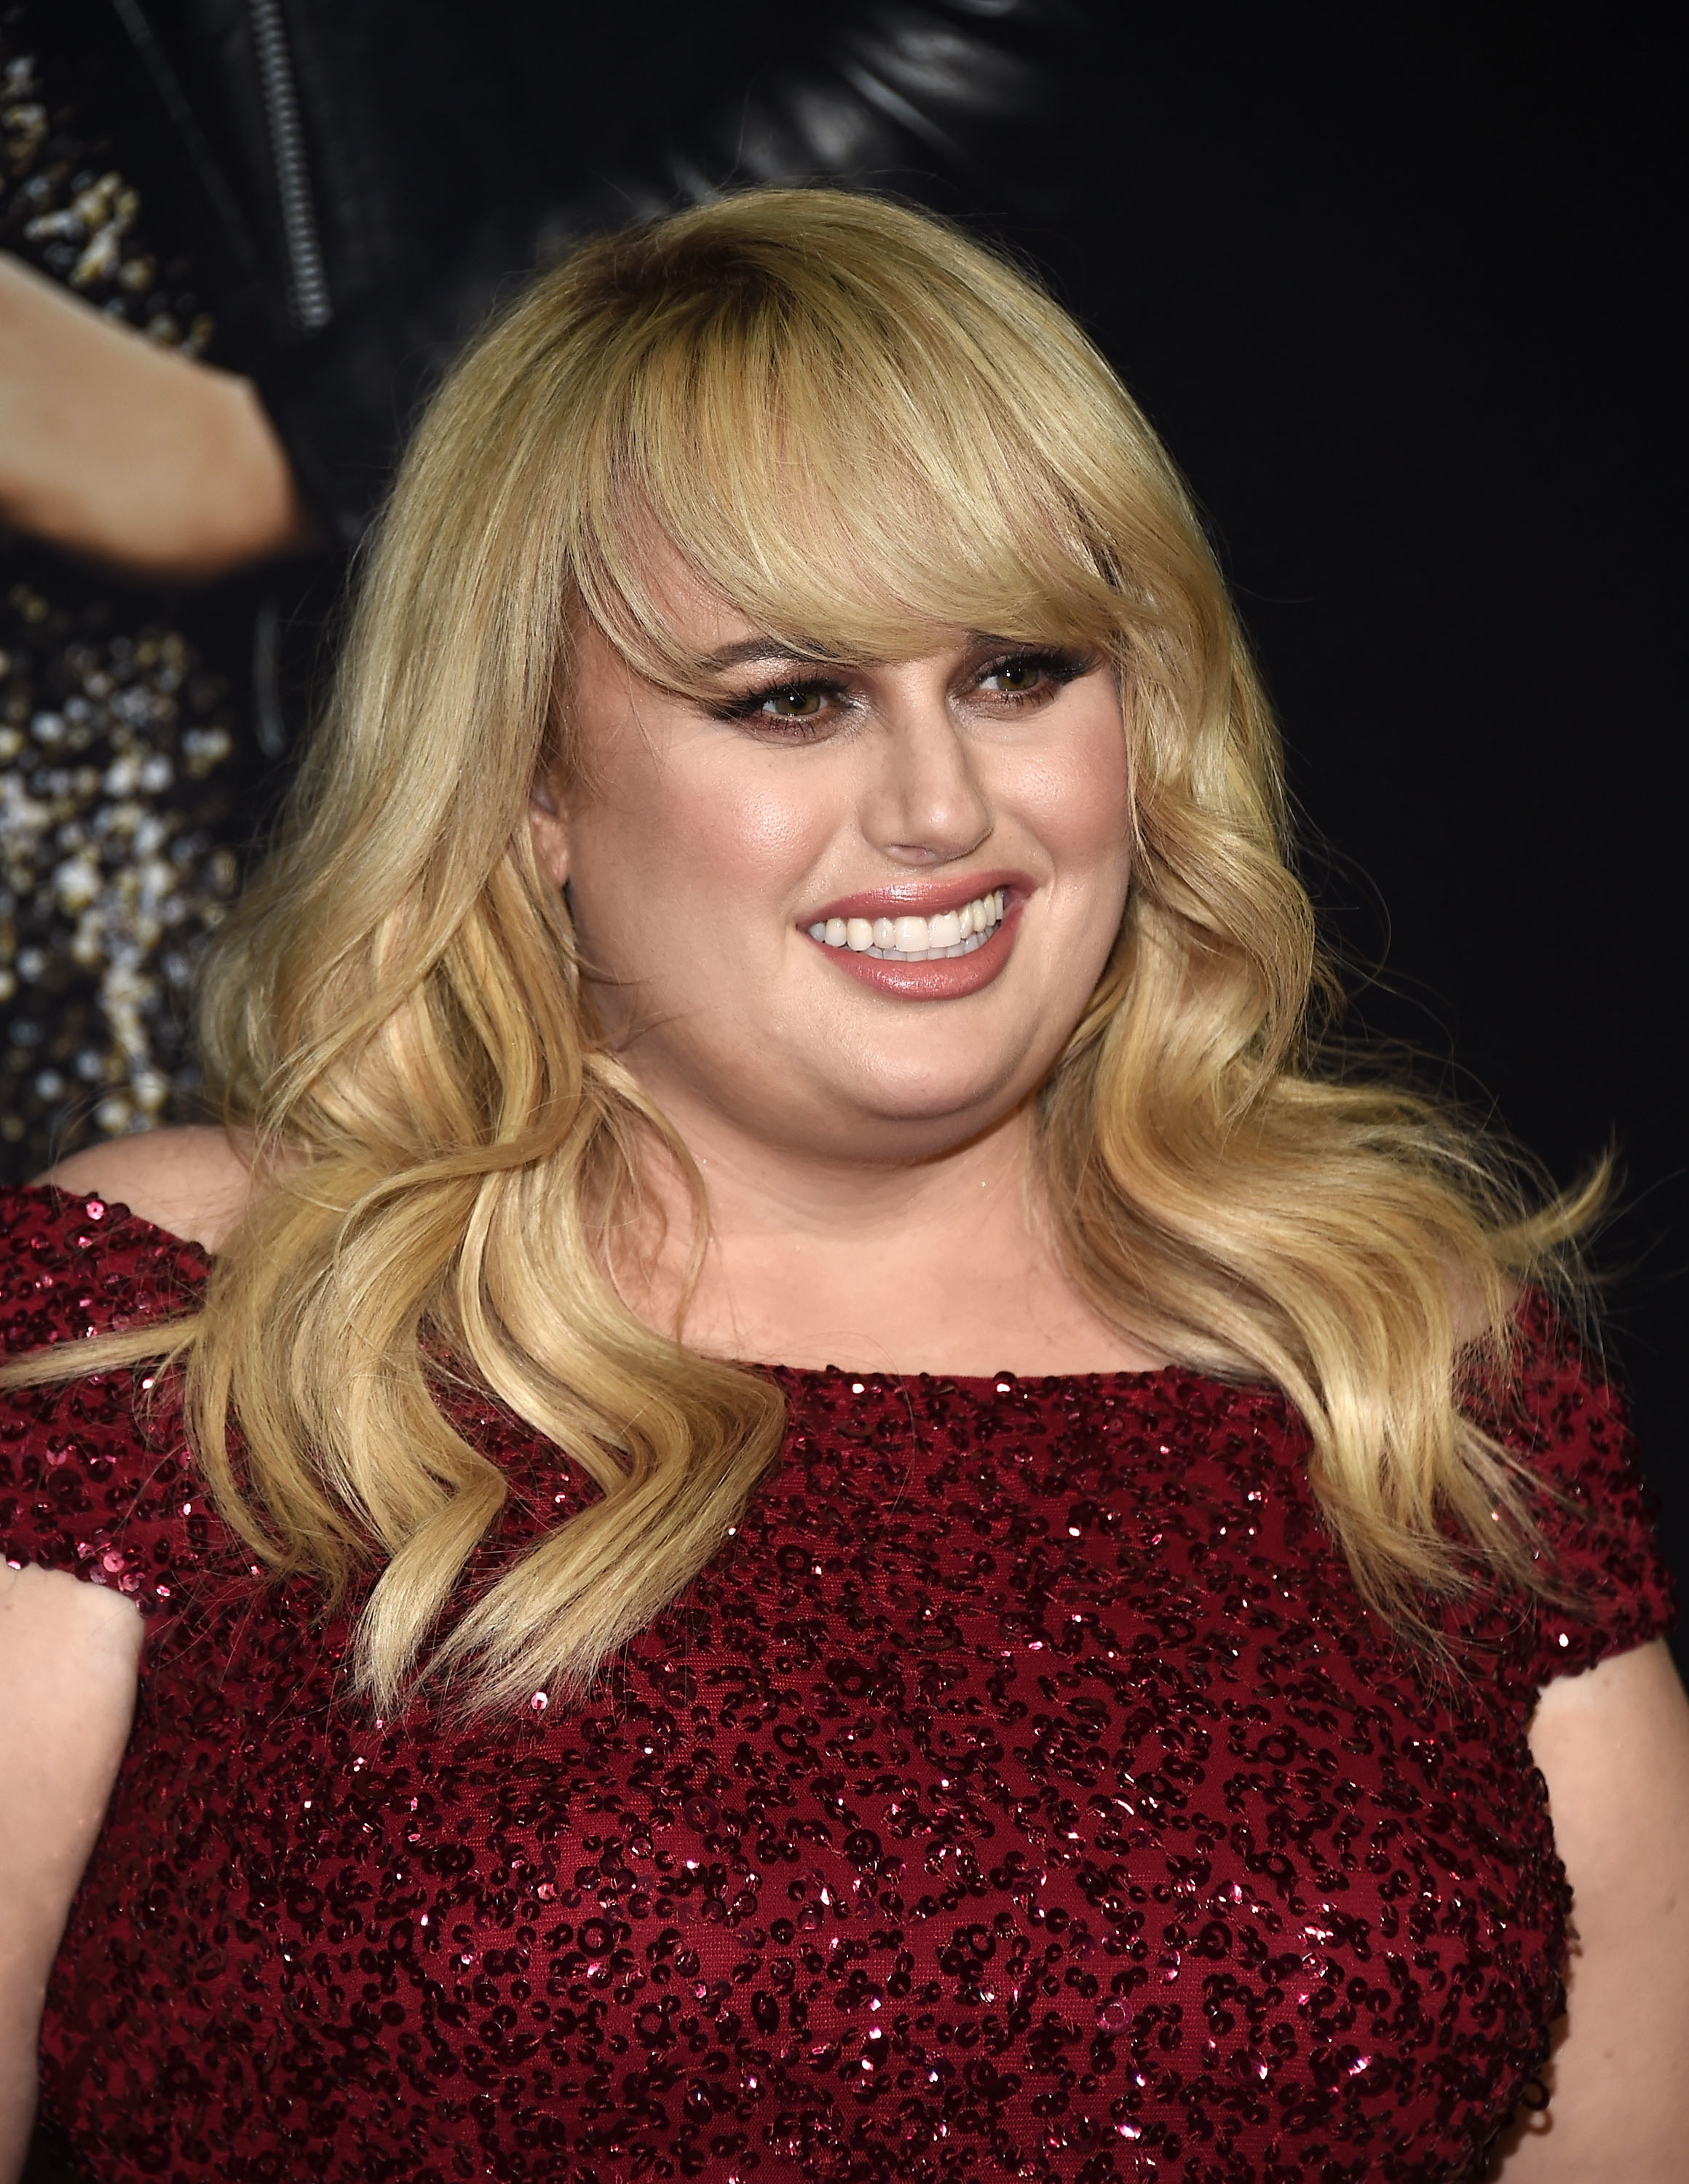 Rebel Wilson in a sequined dress smiling at an event